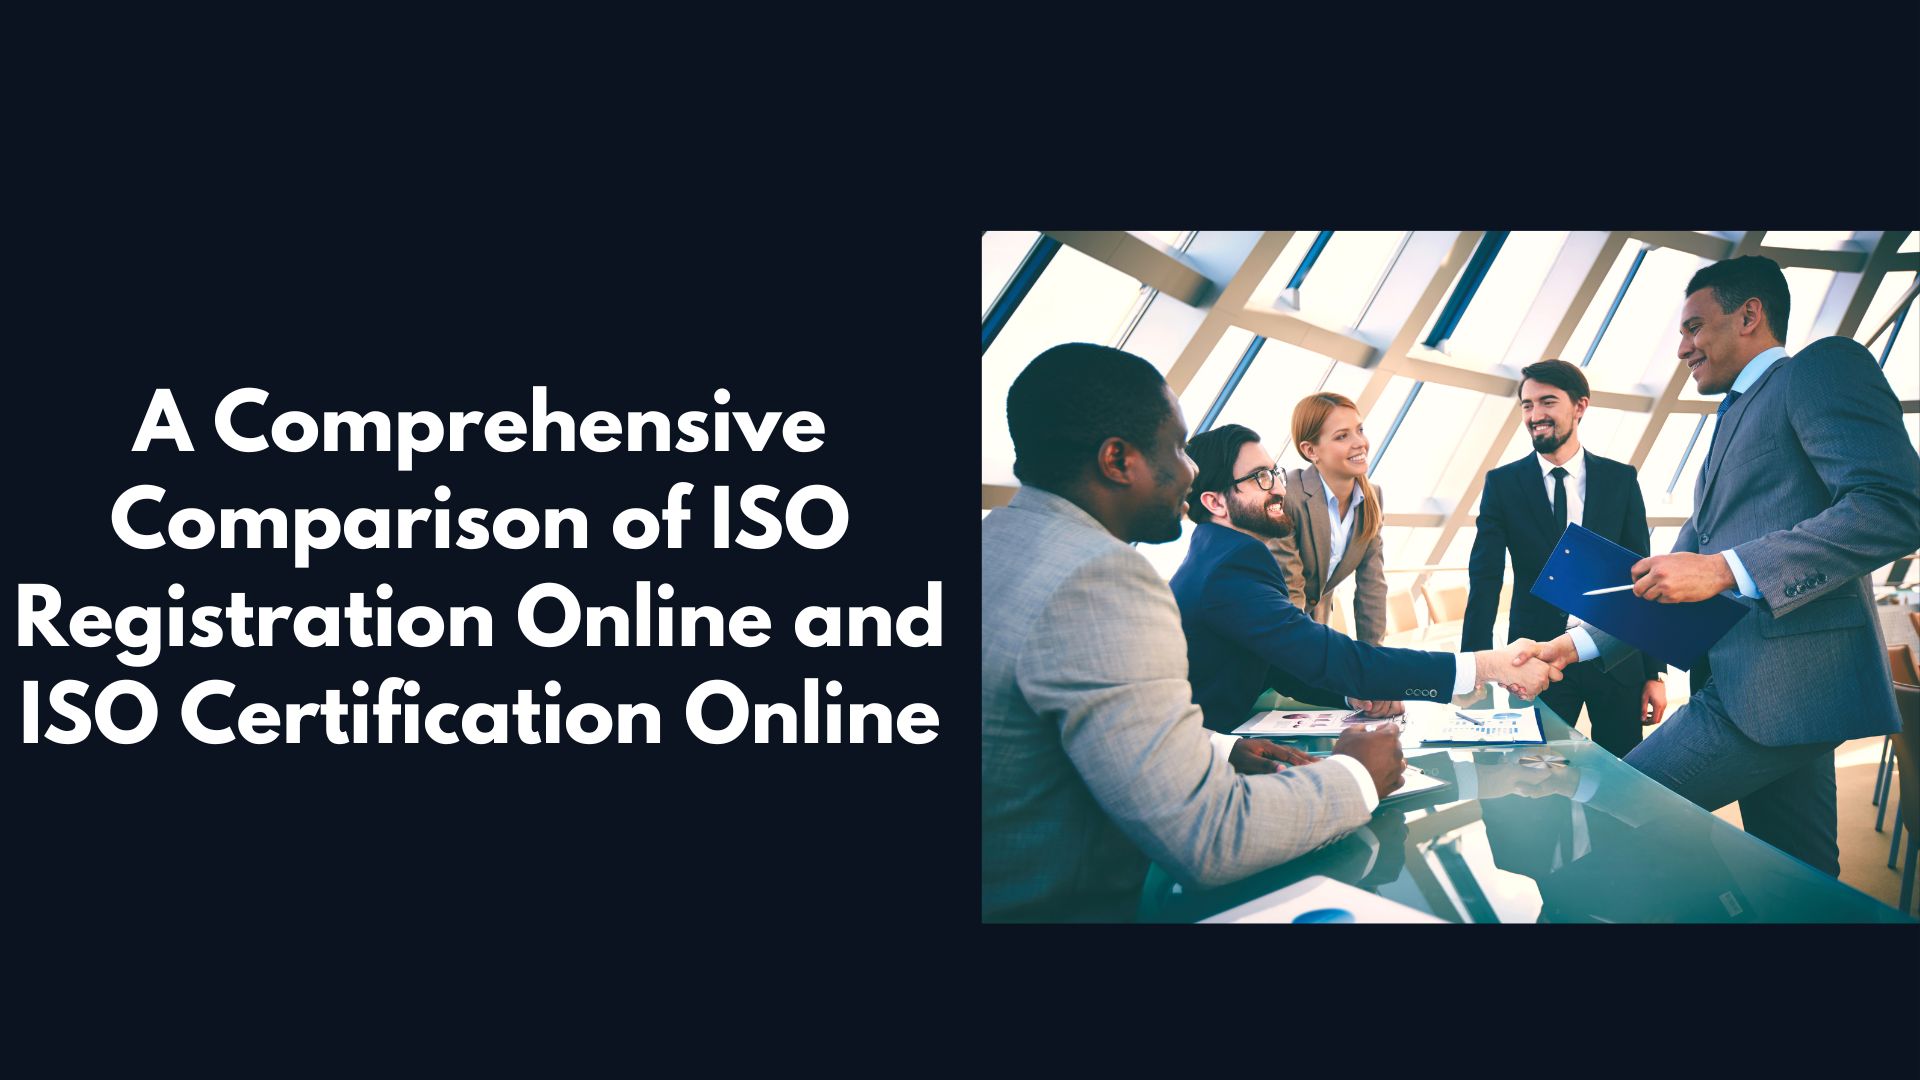 A Comprehensive Comparison of ISO Registration Online and ISO Certification Online